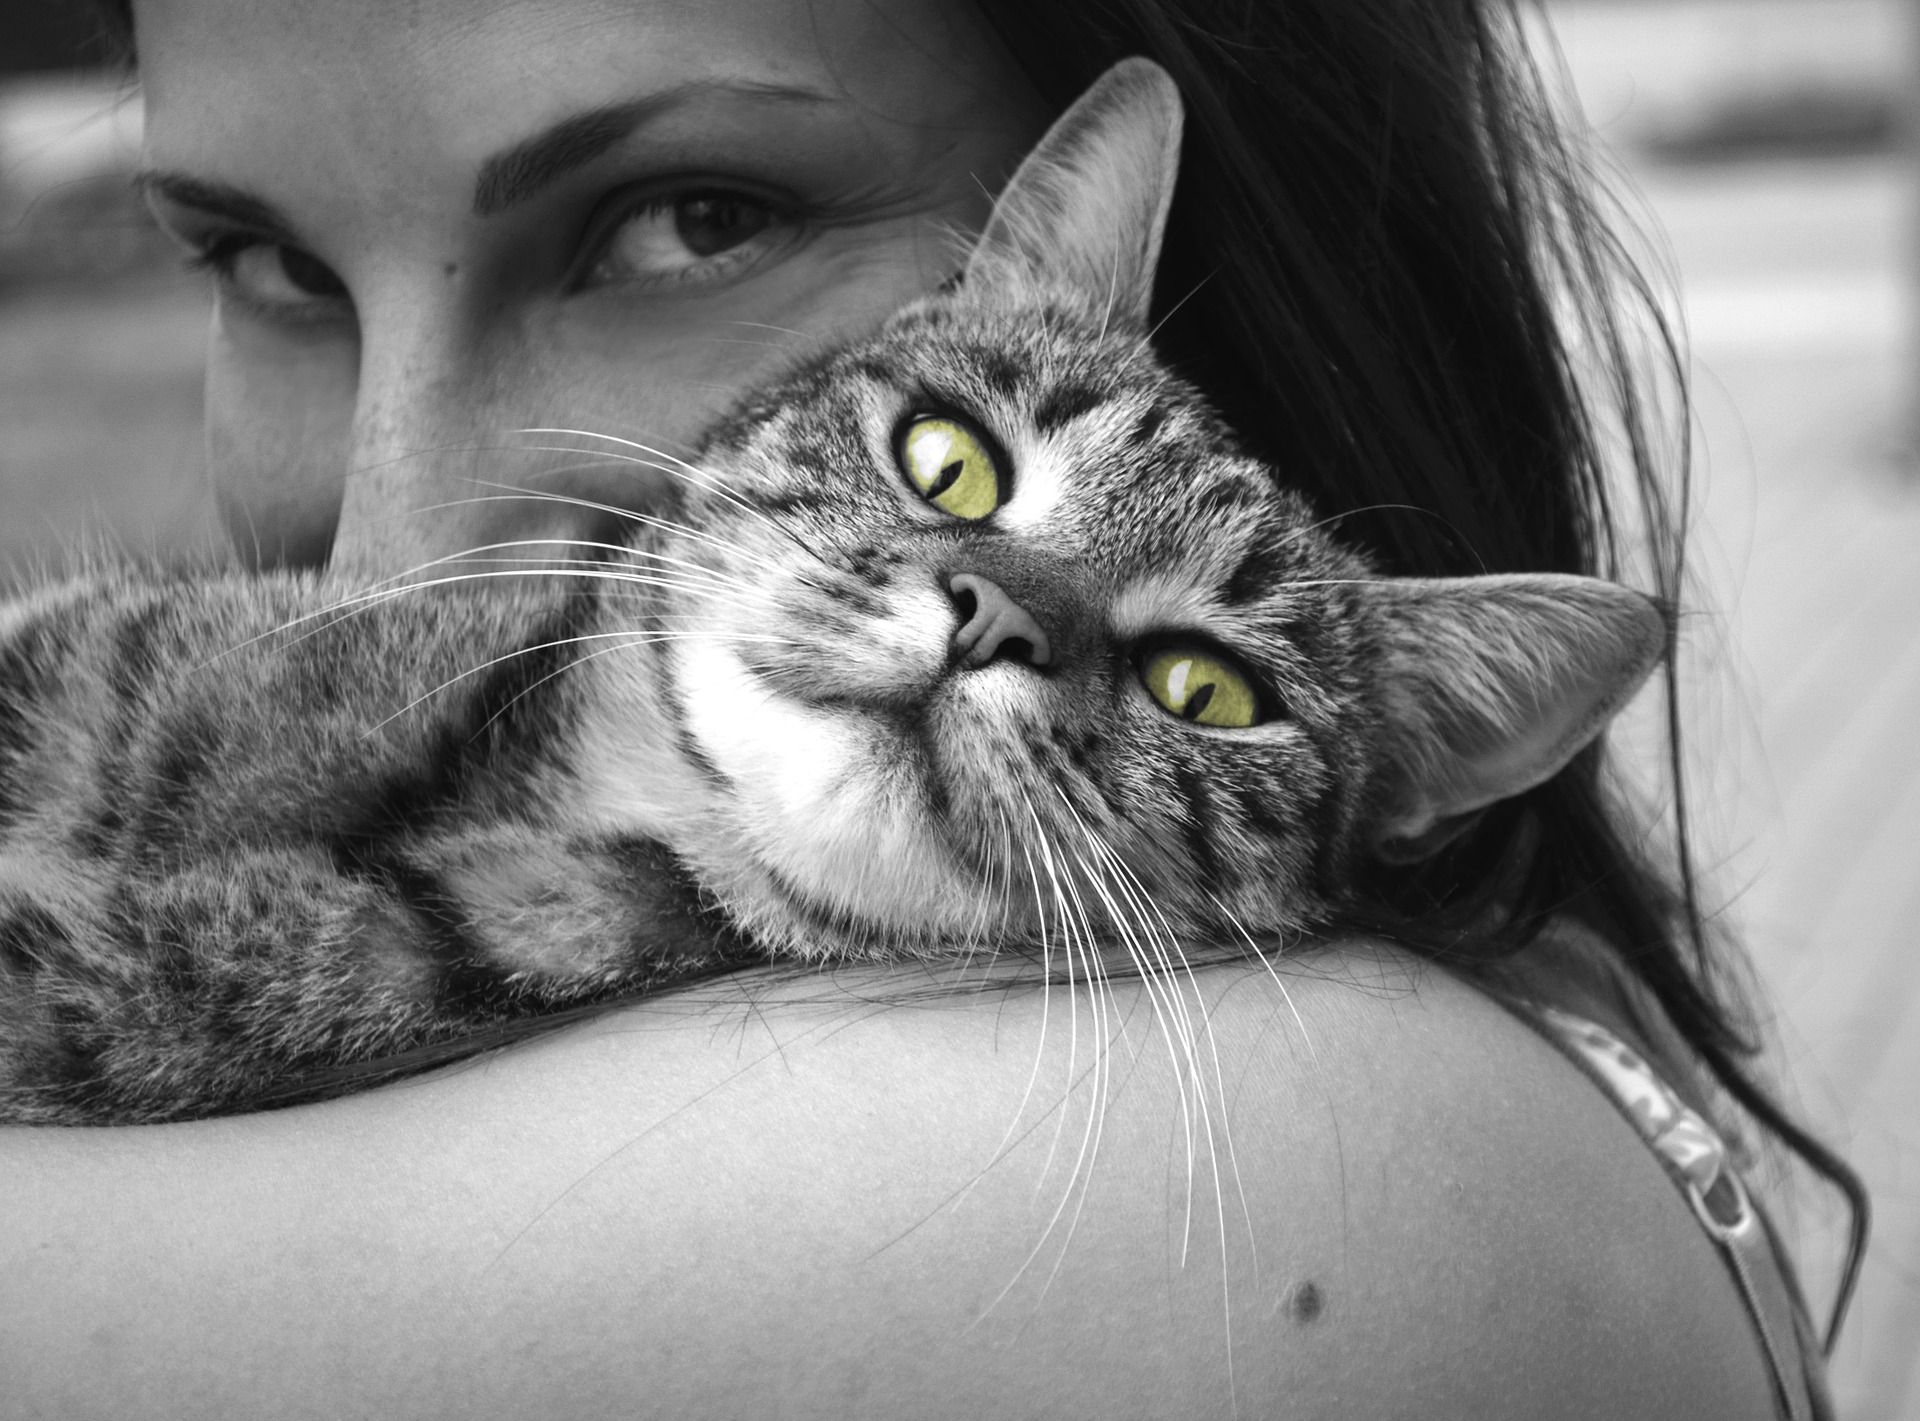 Woman with Her Cat